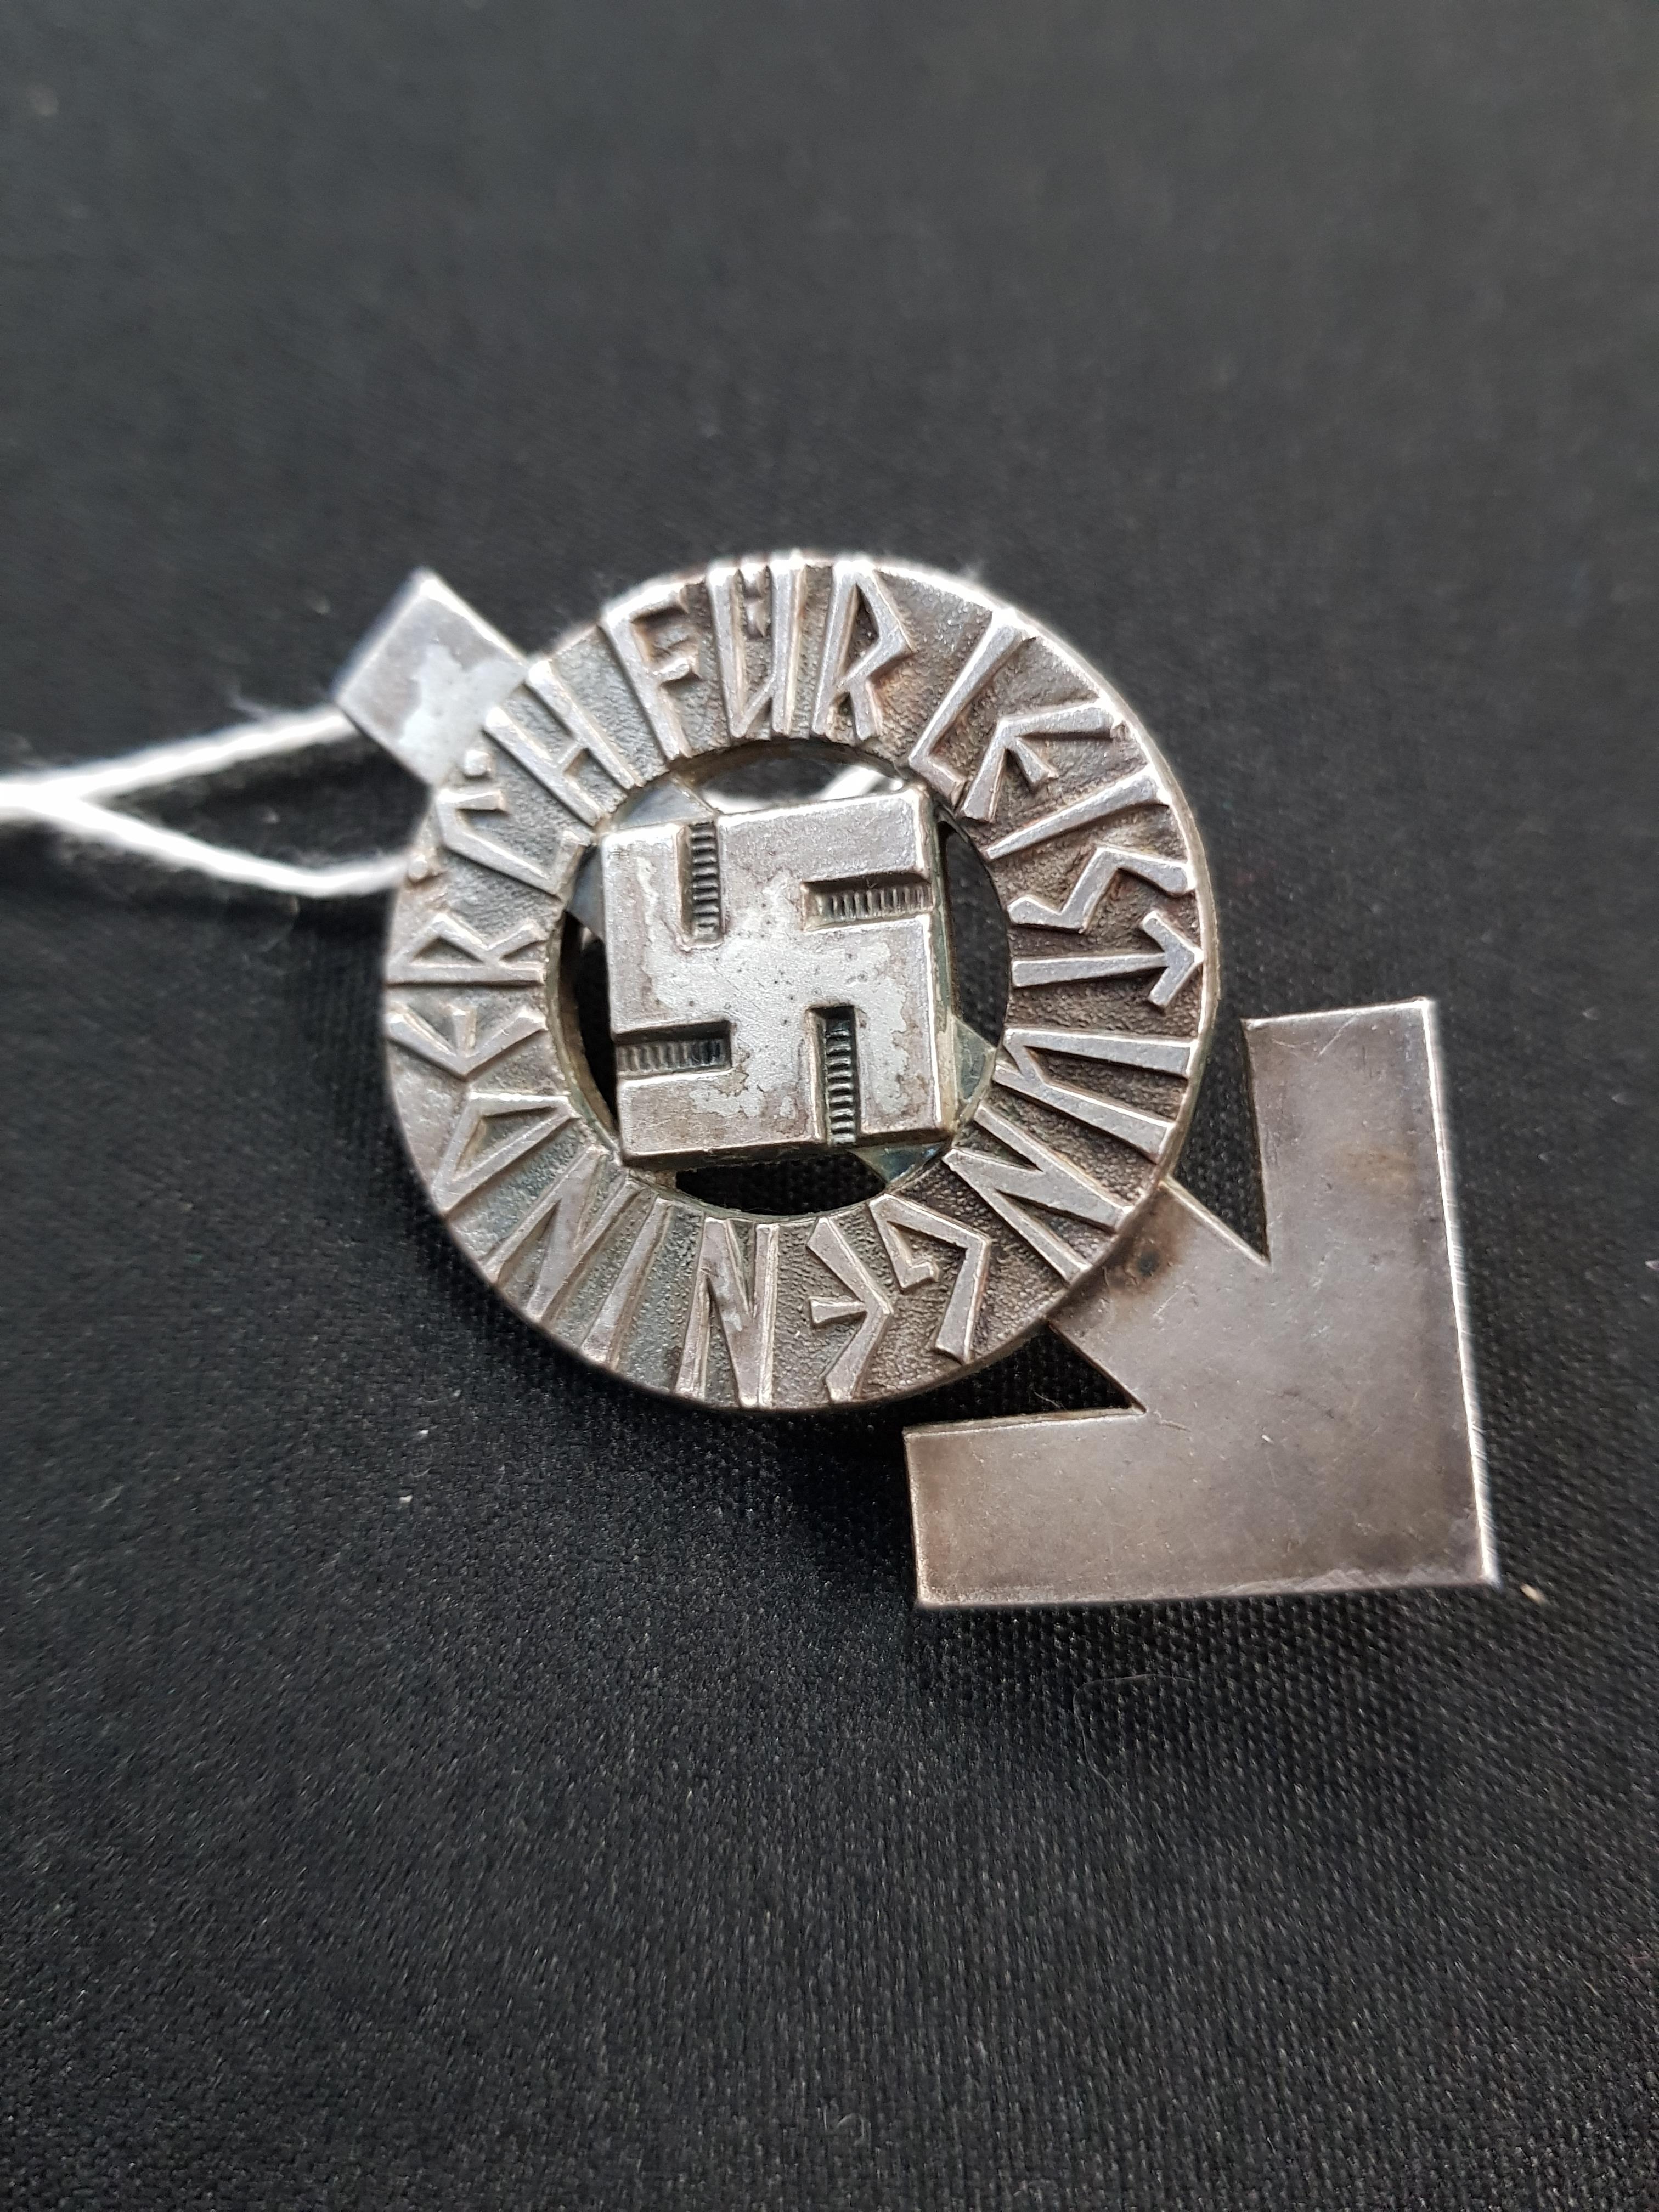 THIRD REICH HITLER YOUTH H.J PROFICIENCY BADGE IN SILVER WITH MAKERS MARK - Image 2 of 2